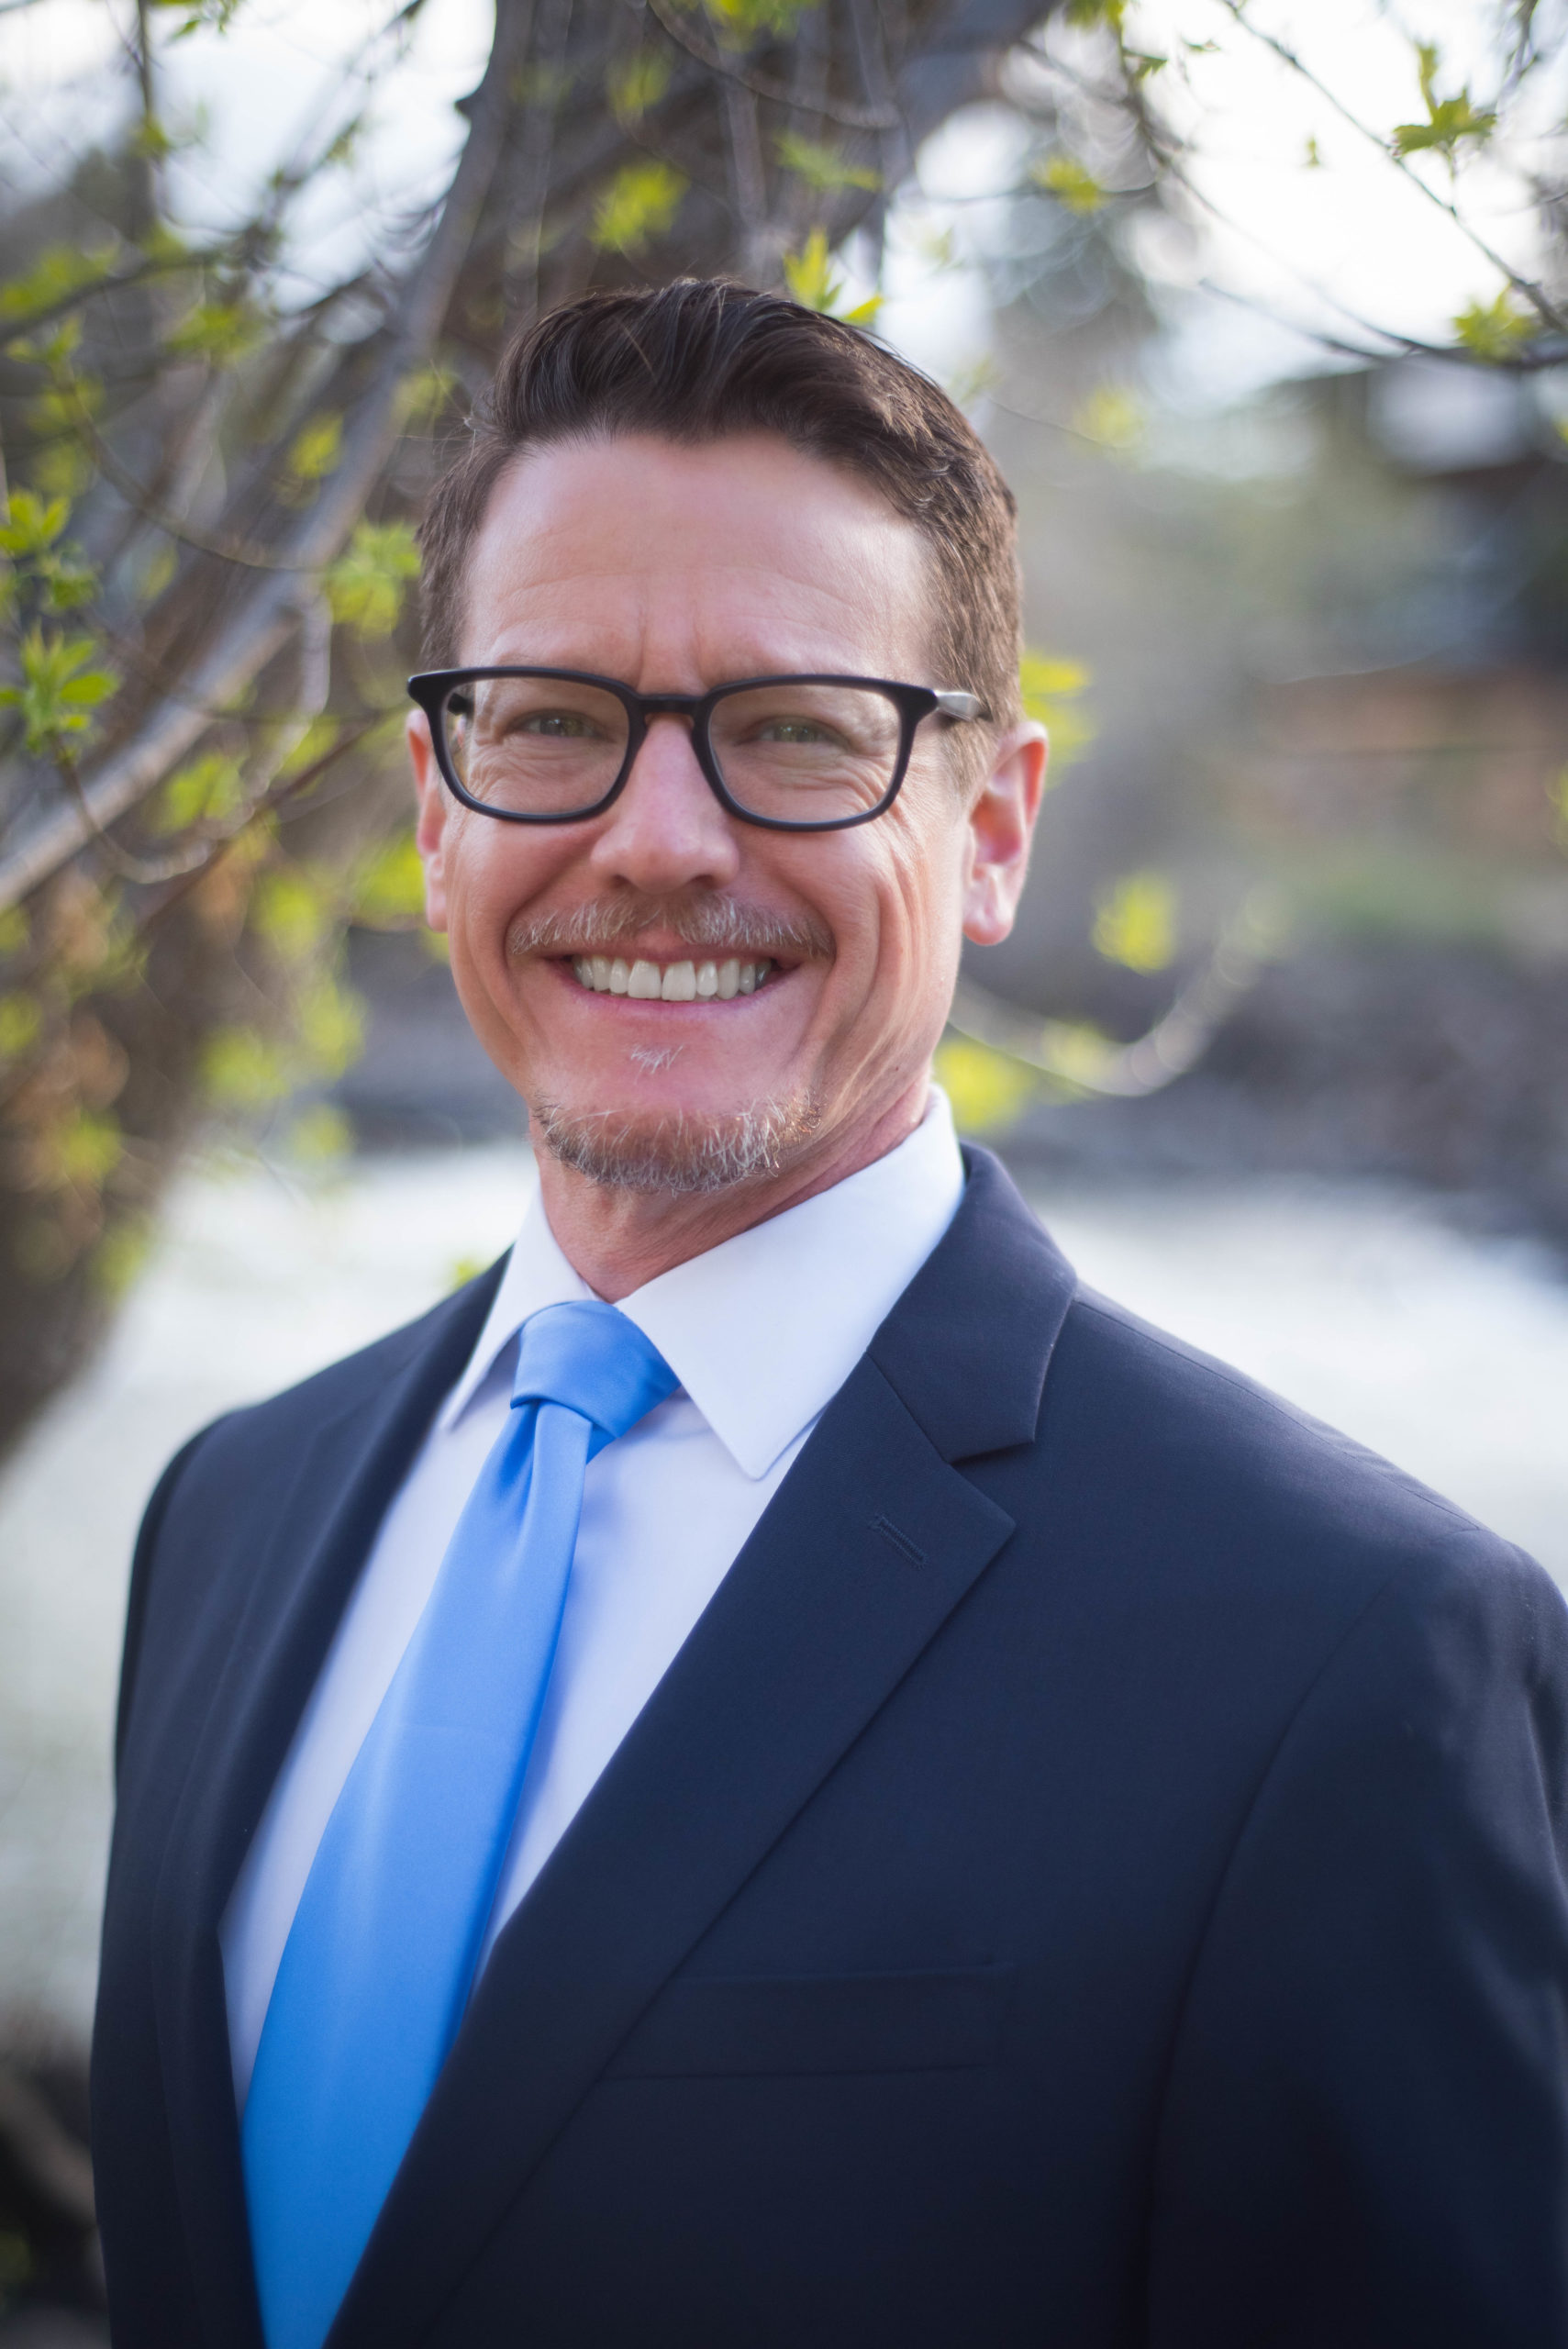 Central Oregon leading Family Law Attorney, Kenneth C. Goodin